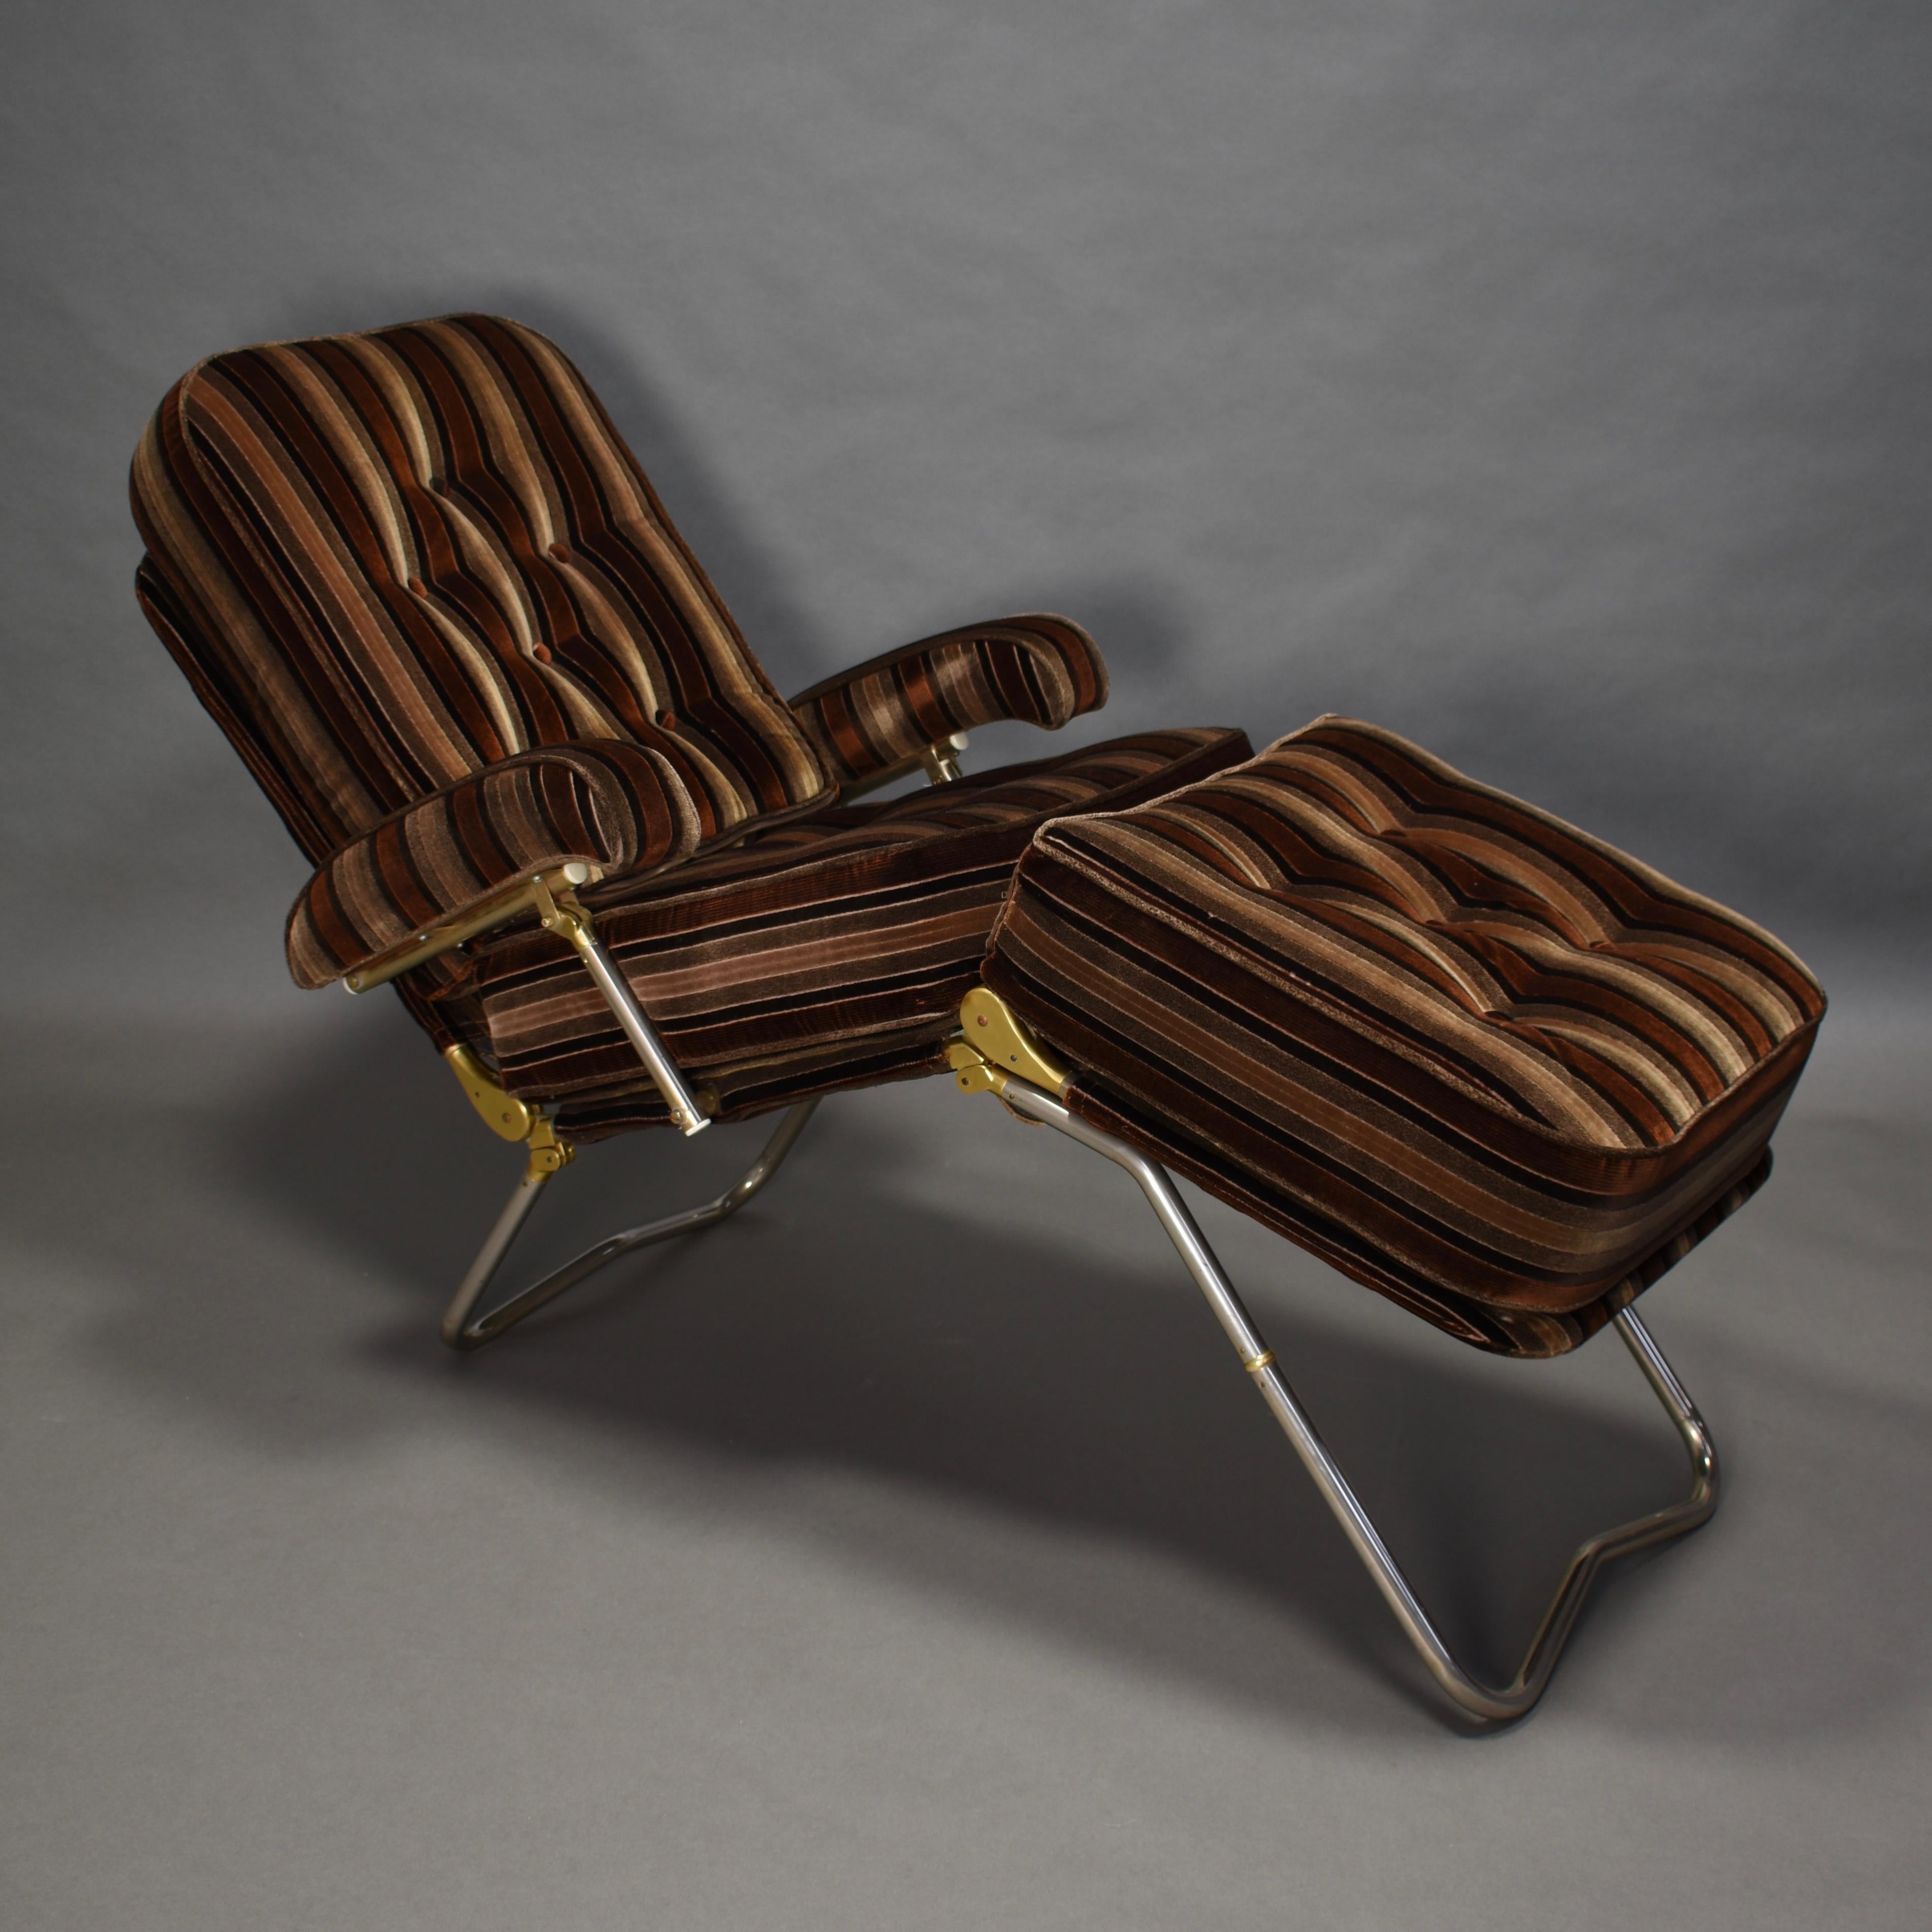 Aluminum Daybed Lounge Chair by Condor Paris, Rue La Fayette, France, circa 1970